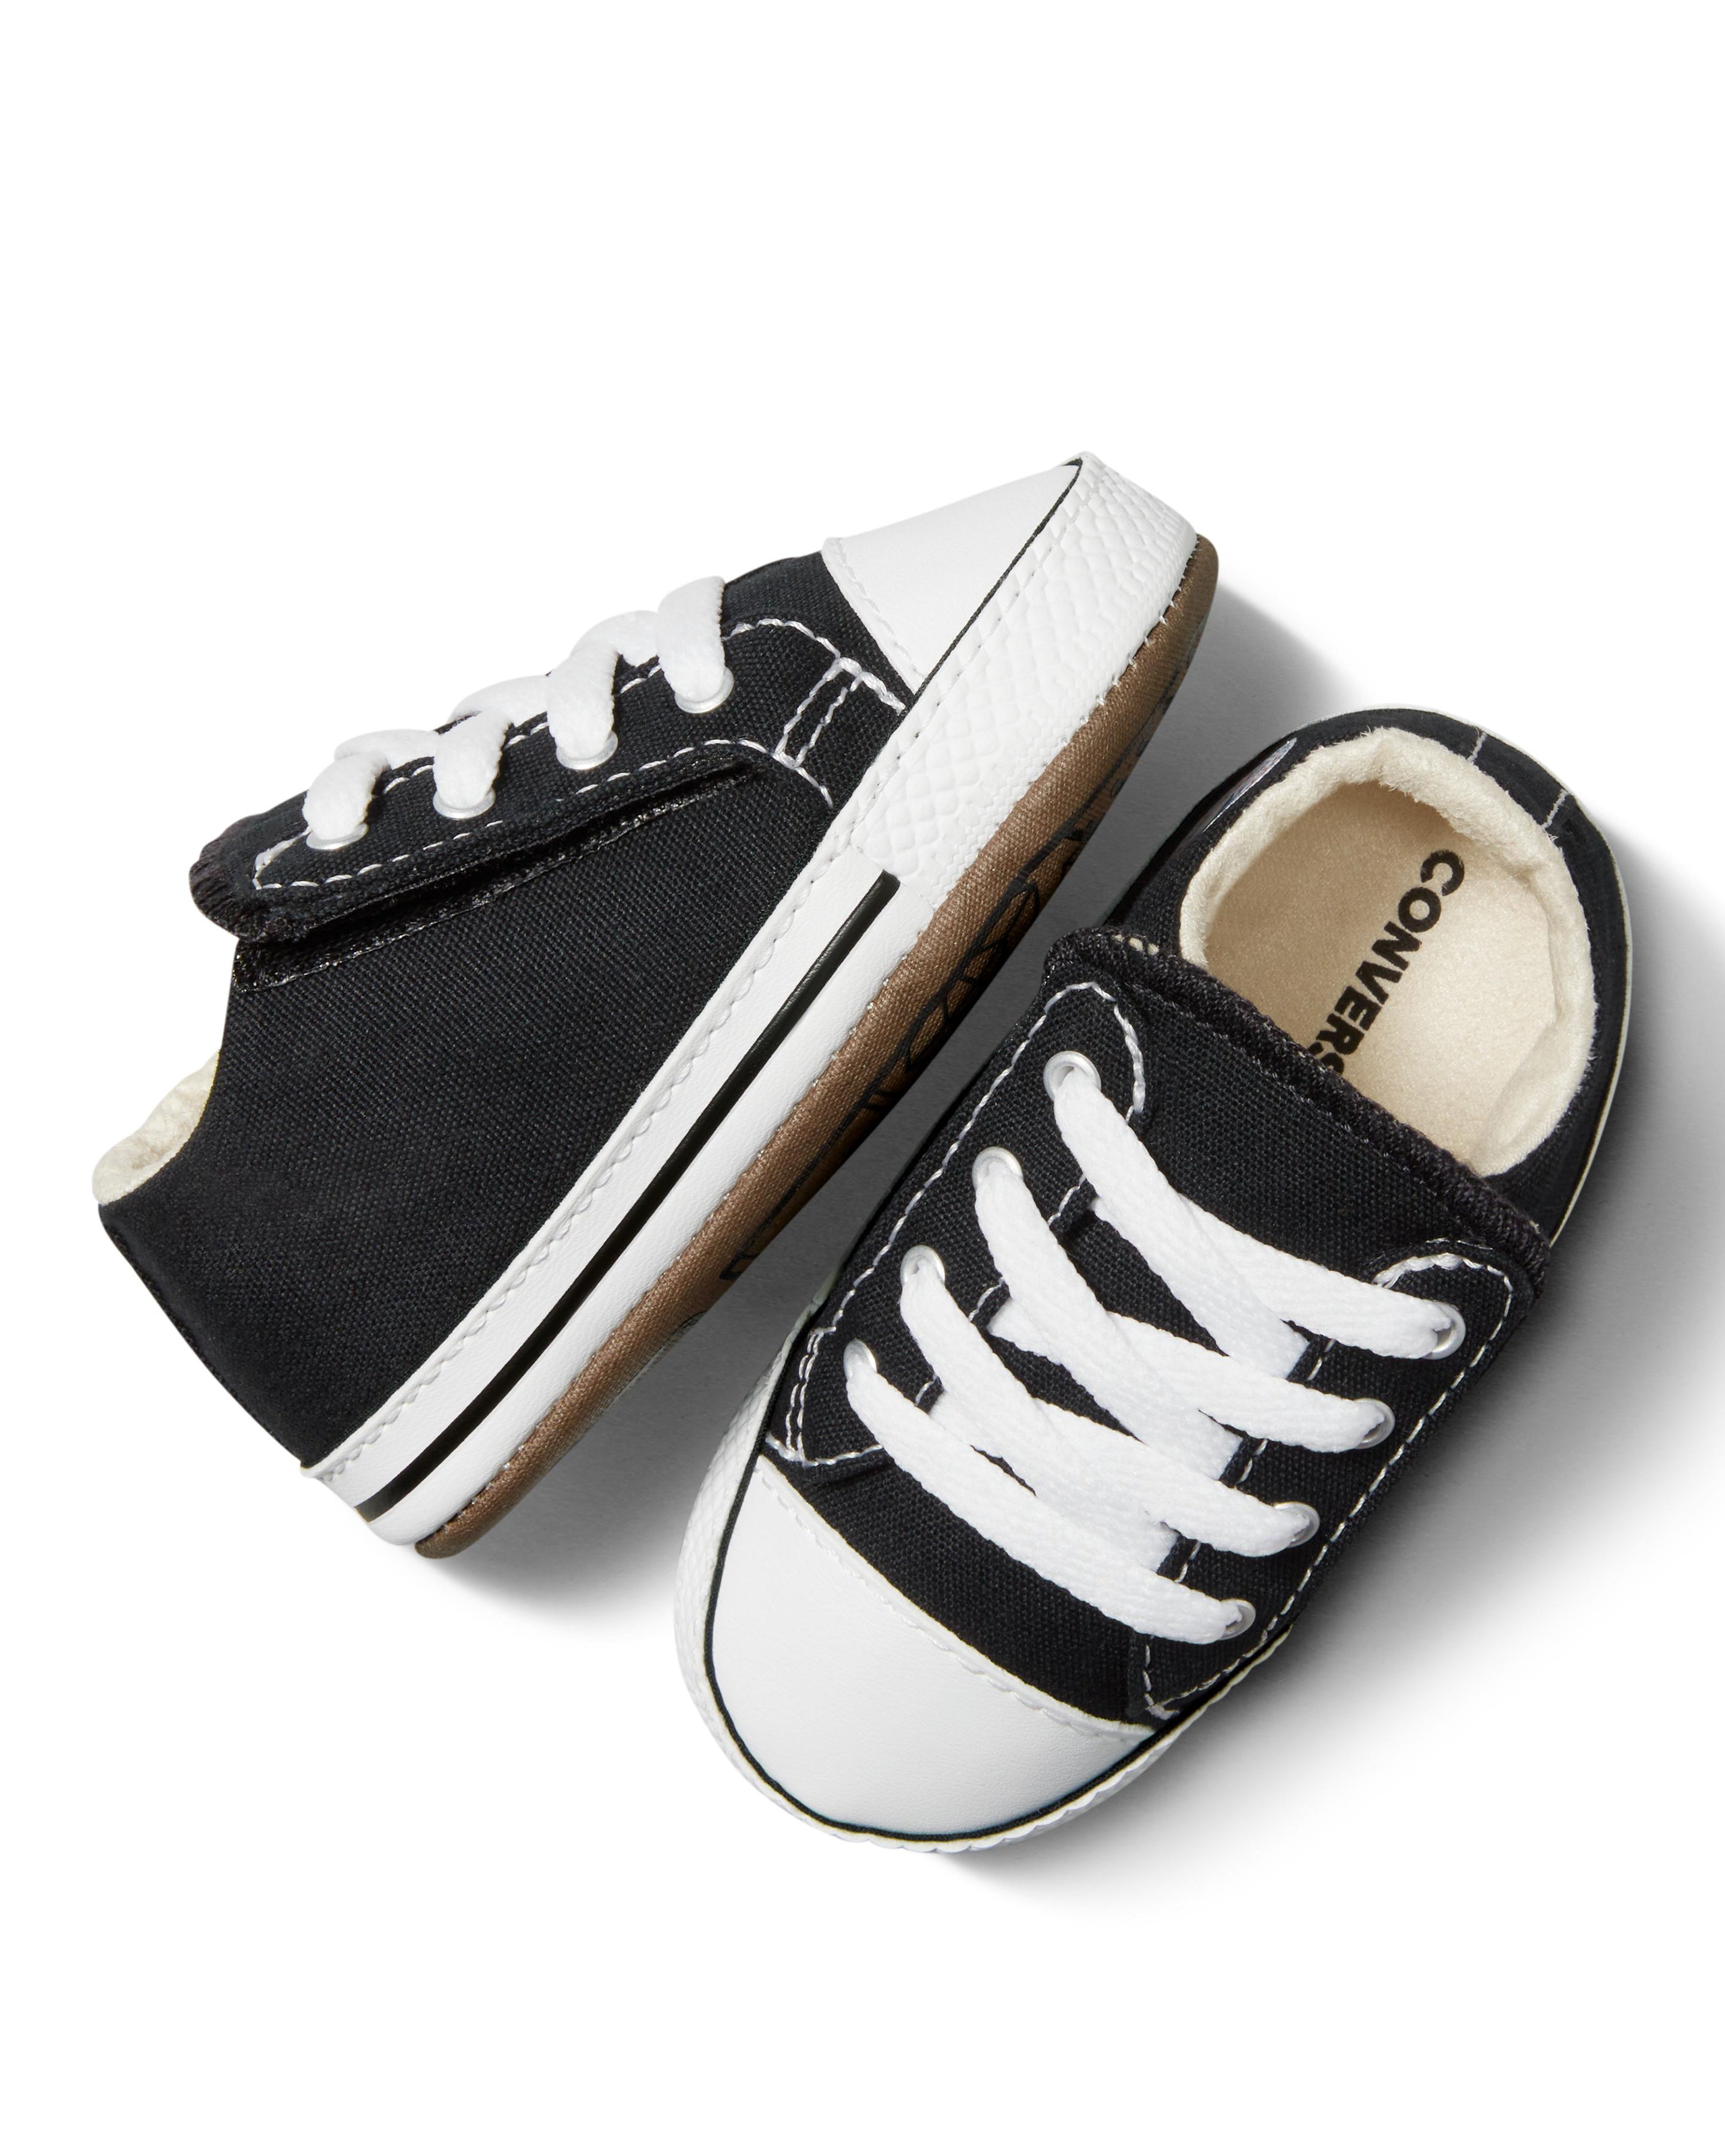 Converse Chuck Taylor Canvas Cribster Infants - Black/Natural Ivory/White